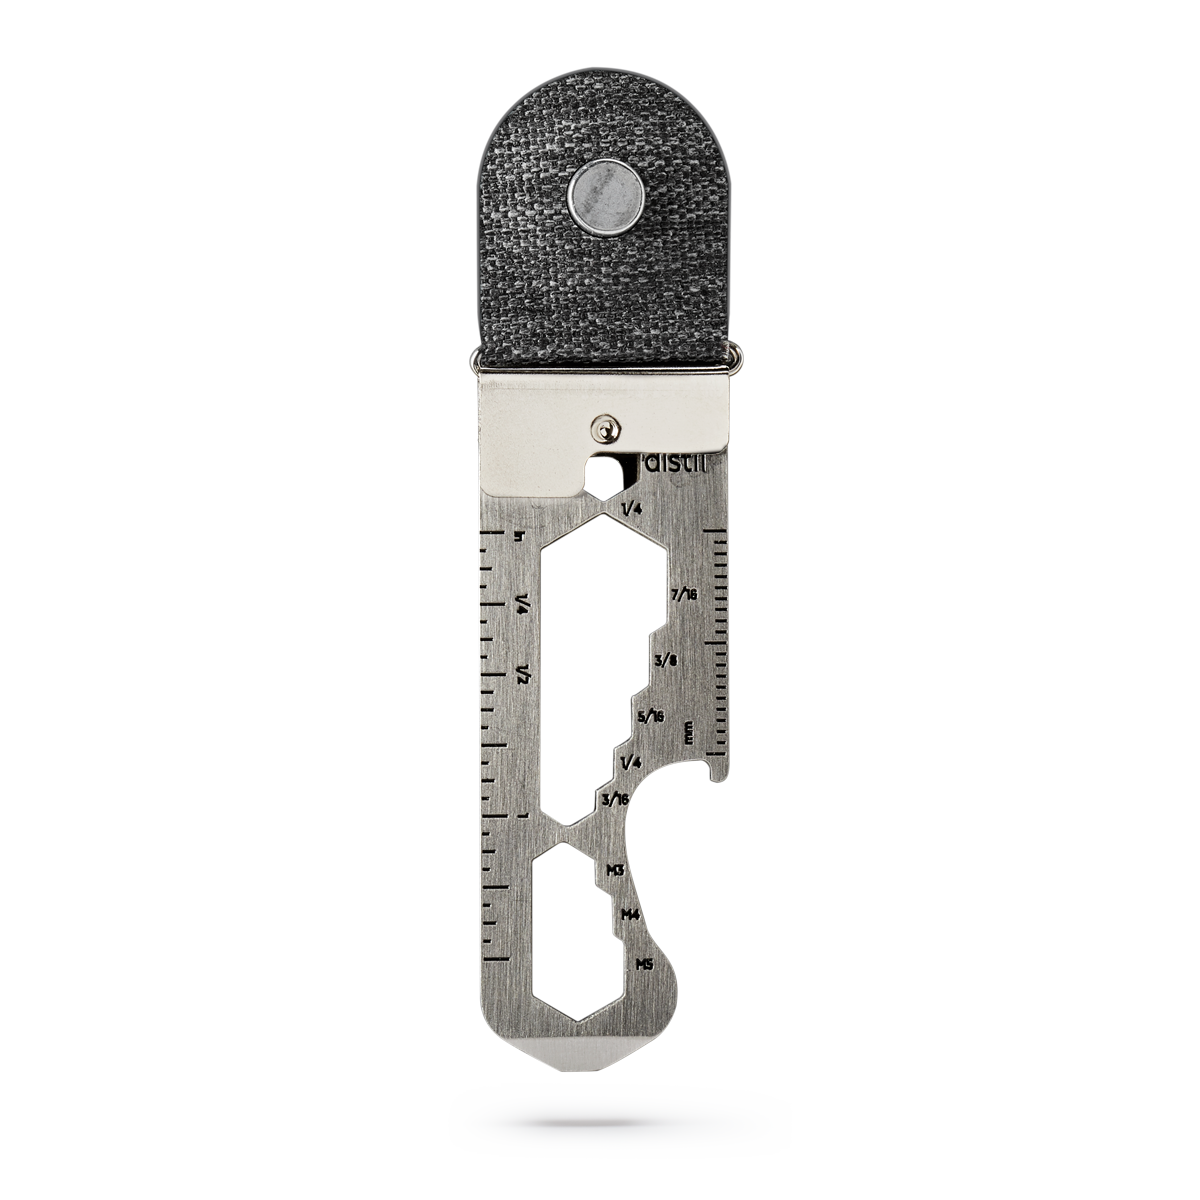 distil keymod multitool with a bottle opener, ruler, and other uses on a white backdrop